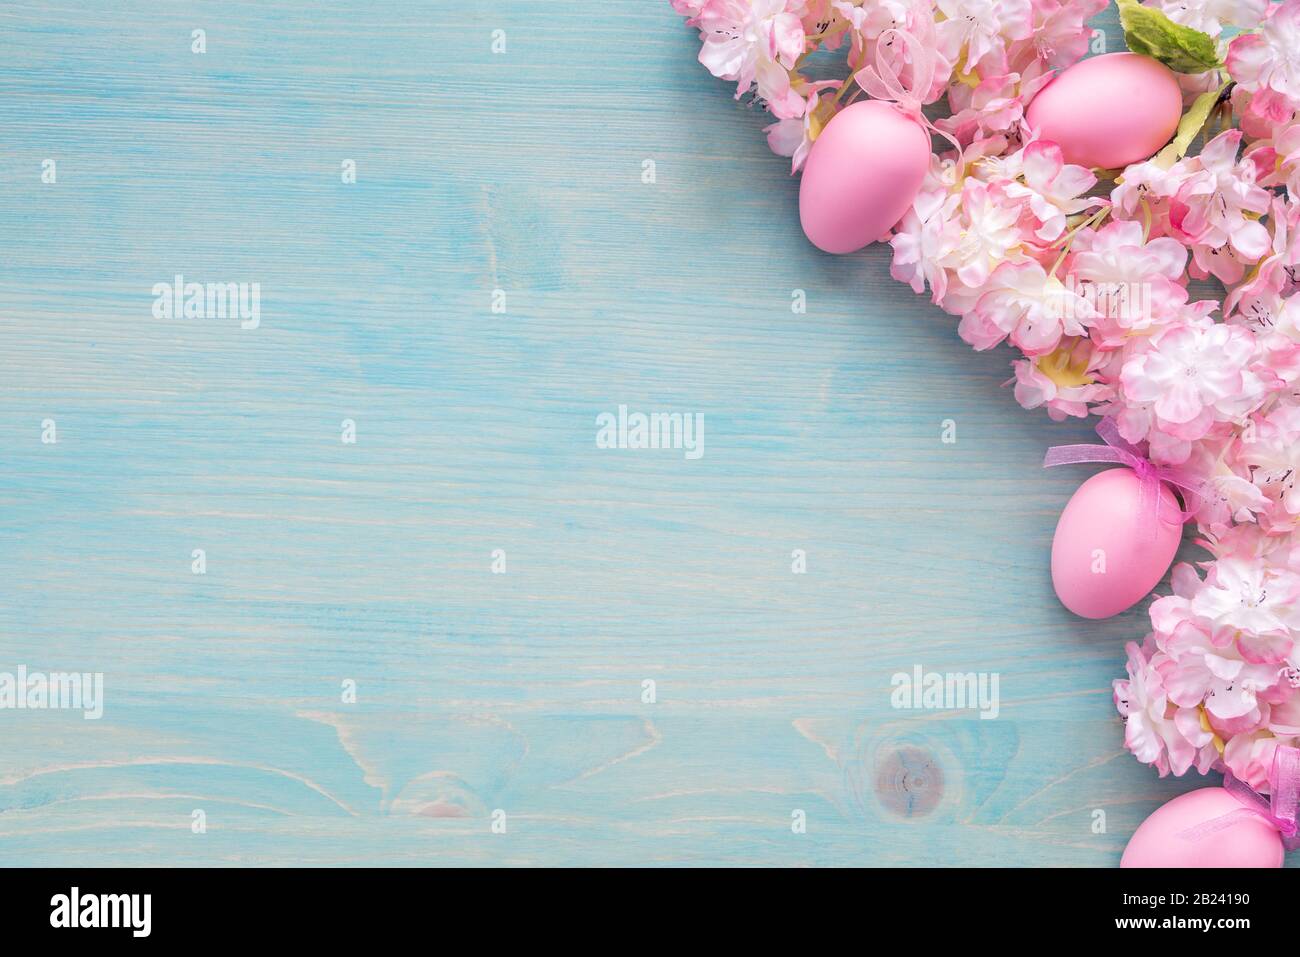 Spring Easter background of painted blue board with branch of flowering cherry covered with pink flowers and pink eggs as a border Stock Photo